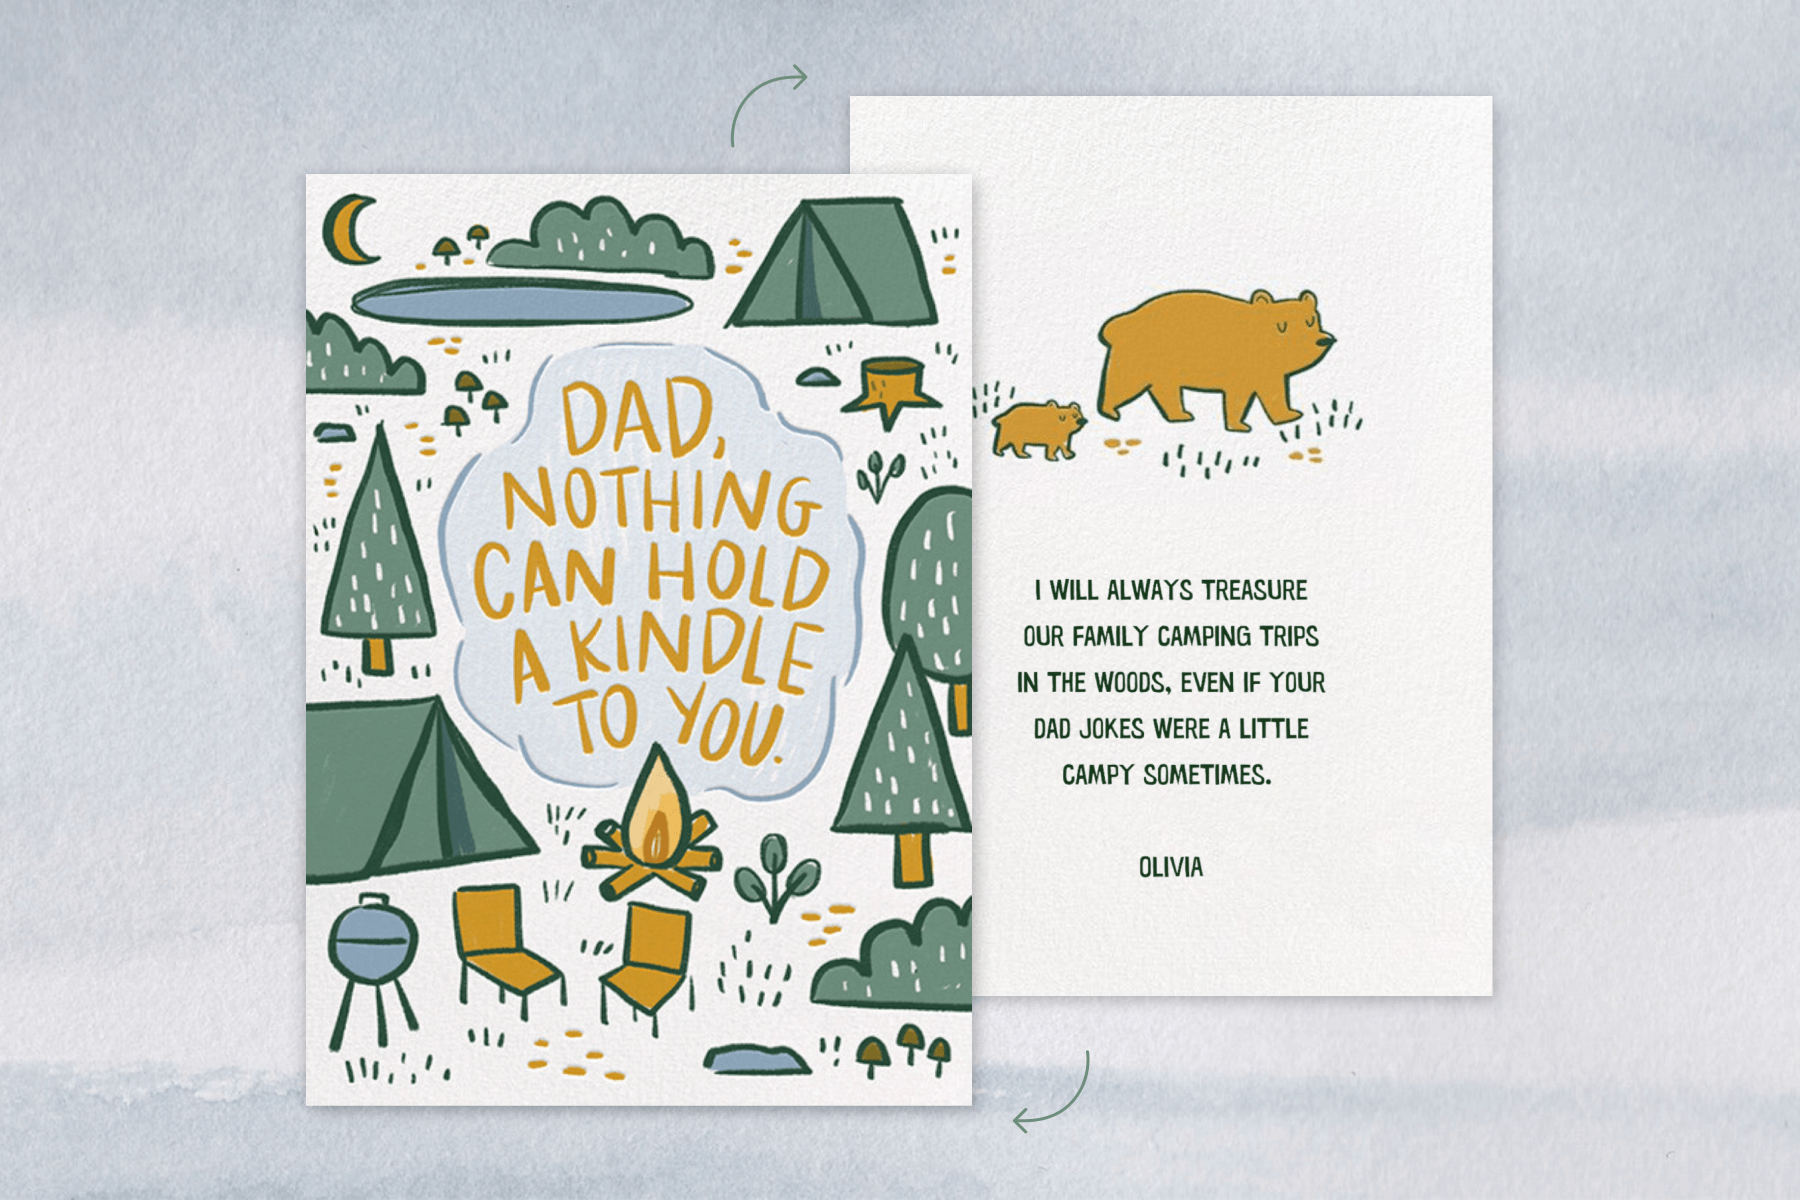 A Father’s Day card featuring an illustration of a camping scene with the words “Dad, nothing can hold a kindle to you.” The back of the card is also shown with a sample message also listed in the suggestions below.